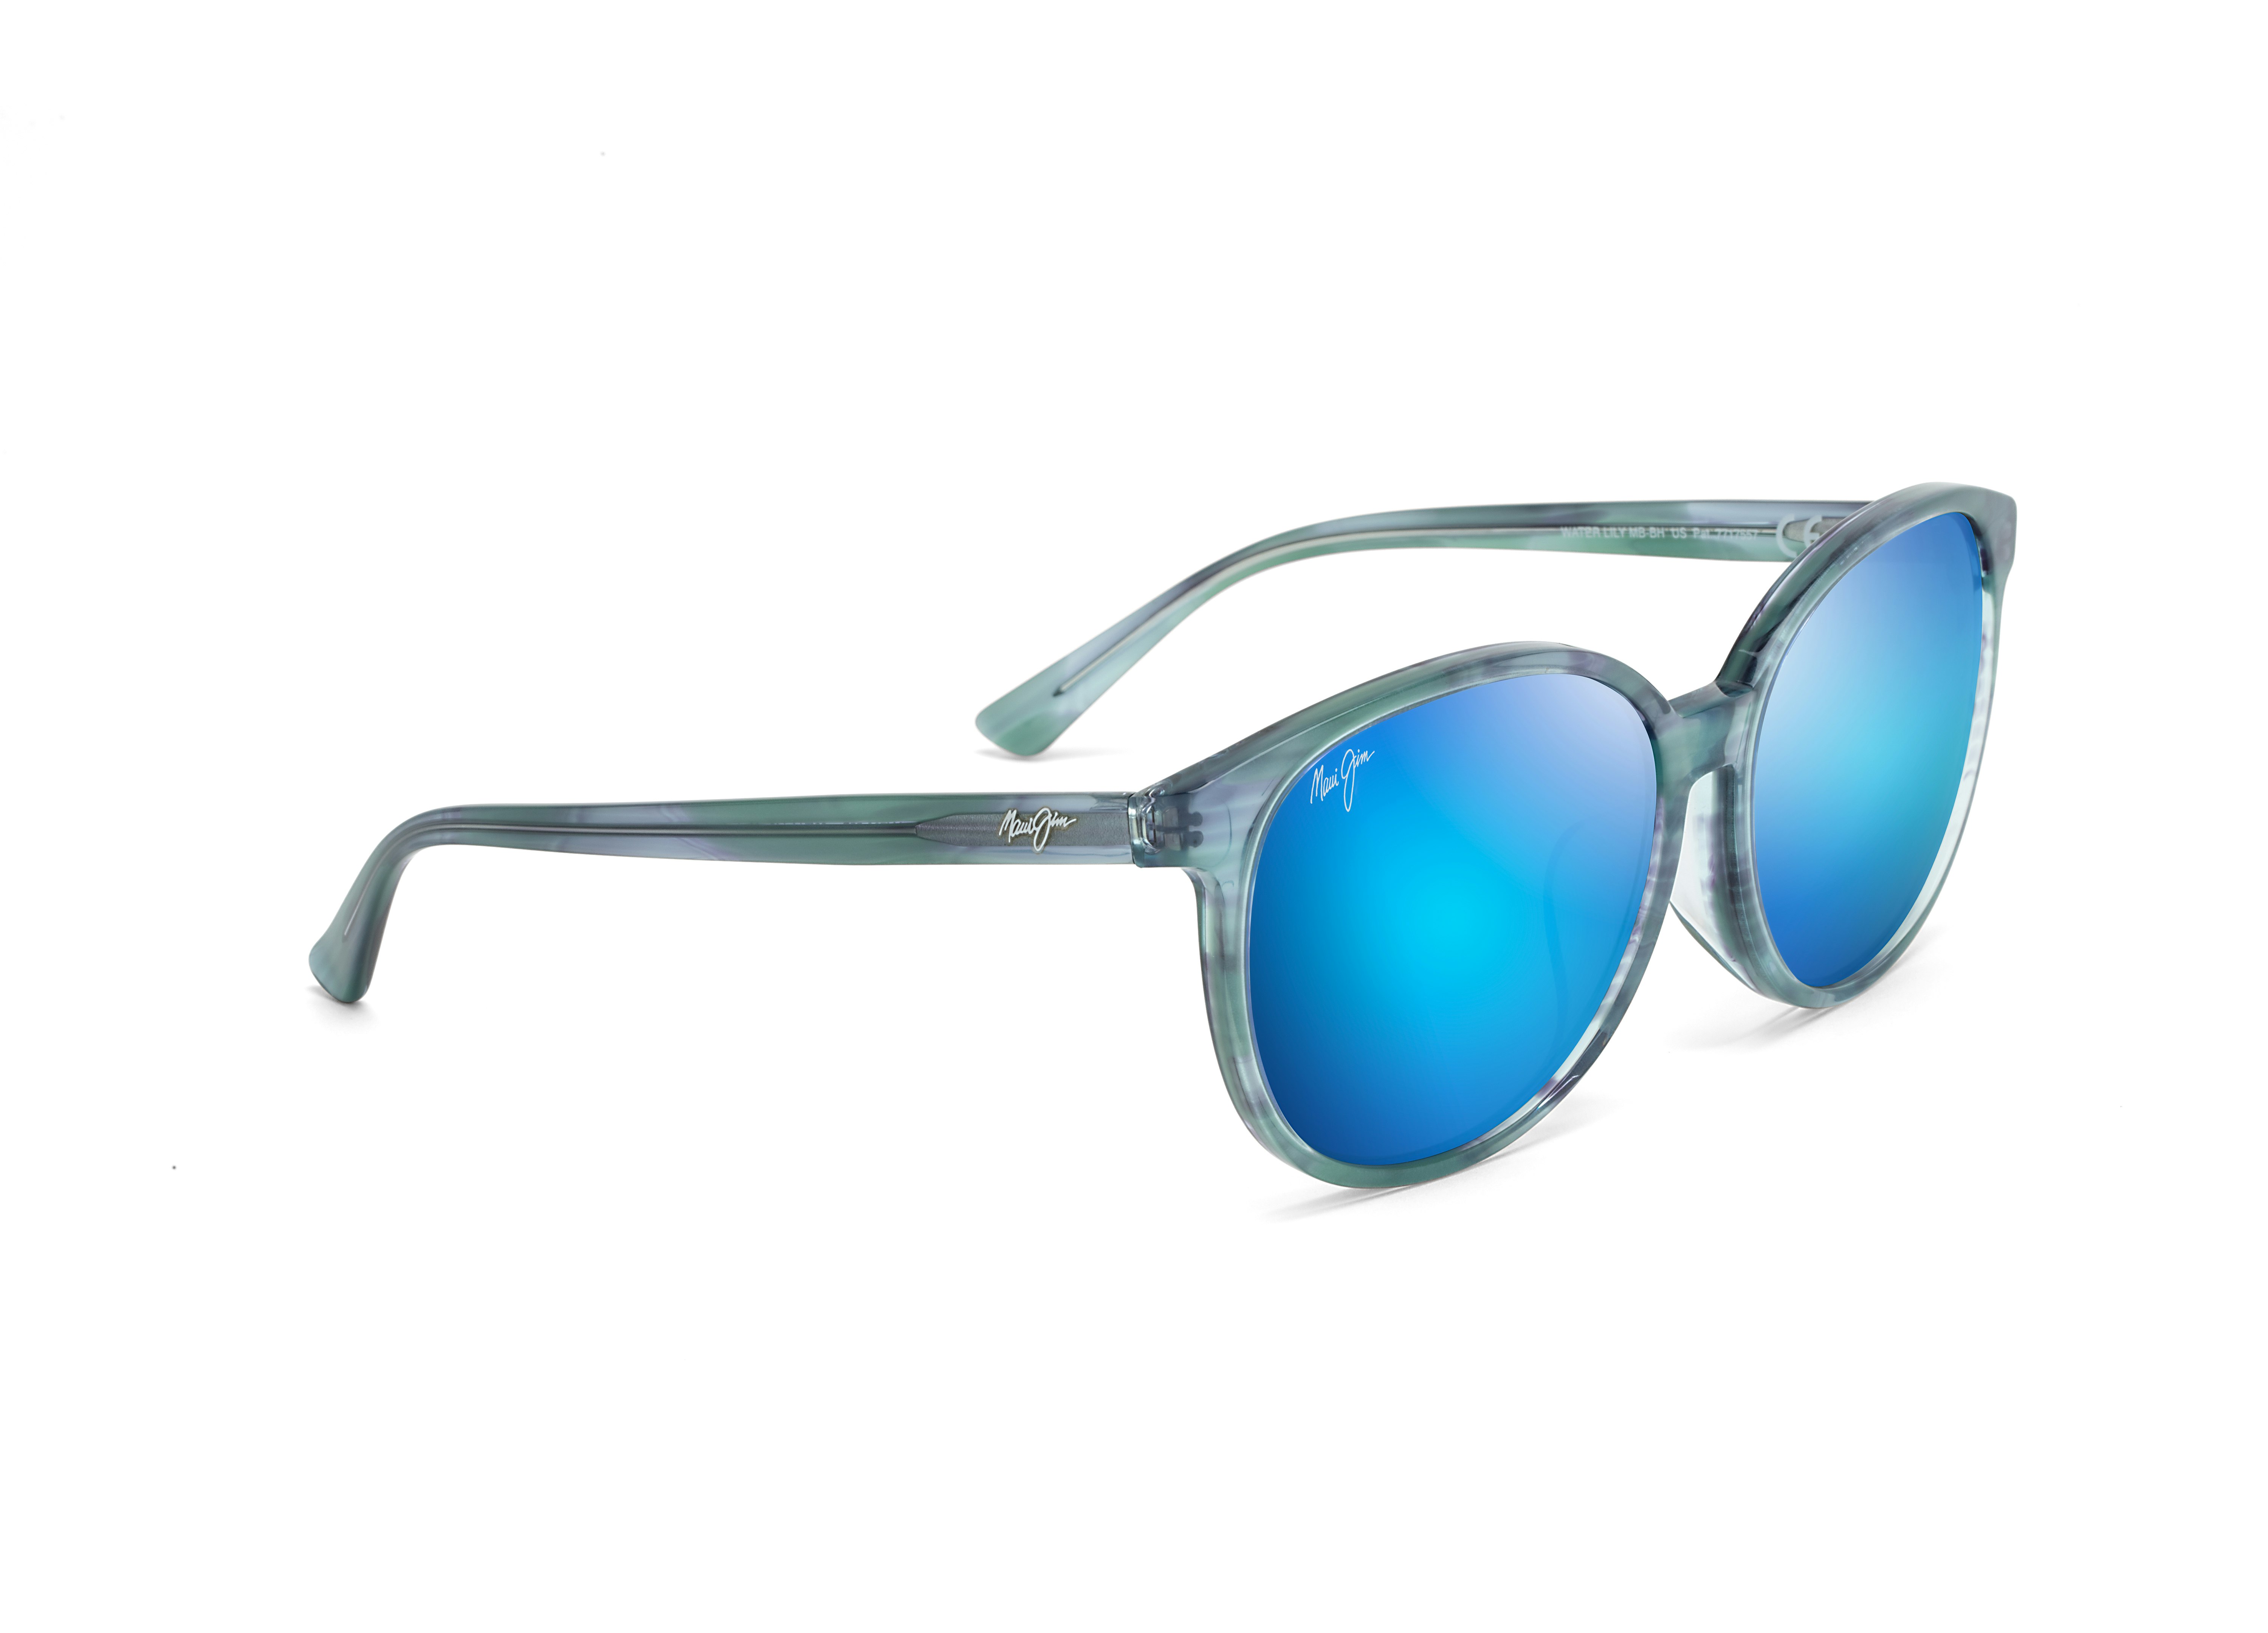 Maui Jim's Water Lily sunglasses - light gray frames with blue reflective lenses